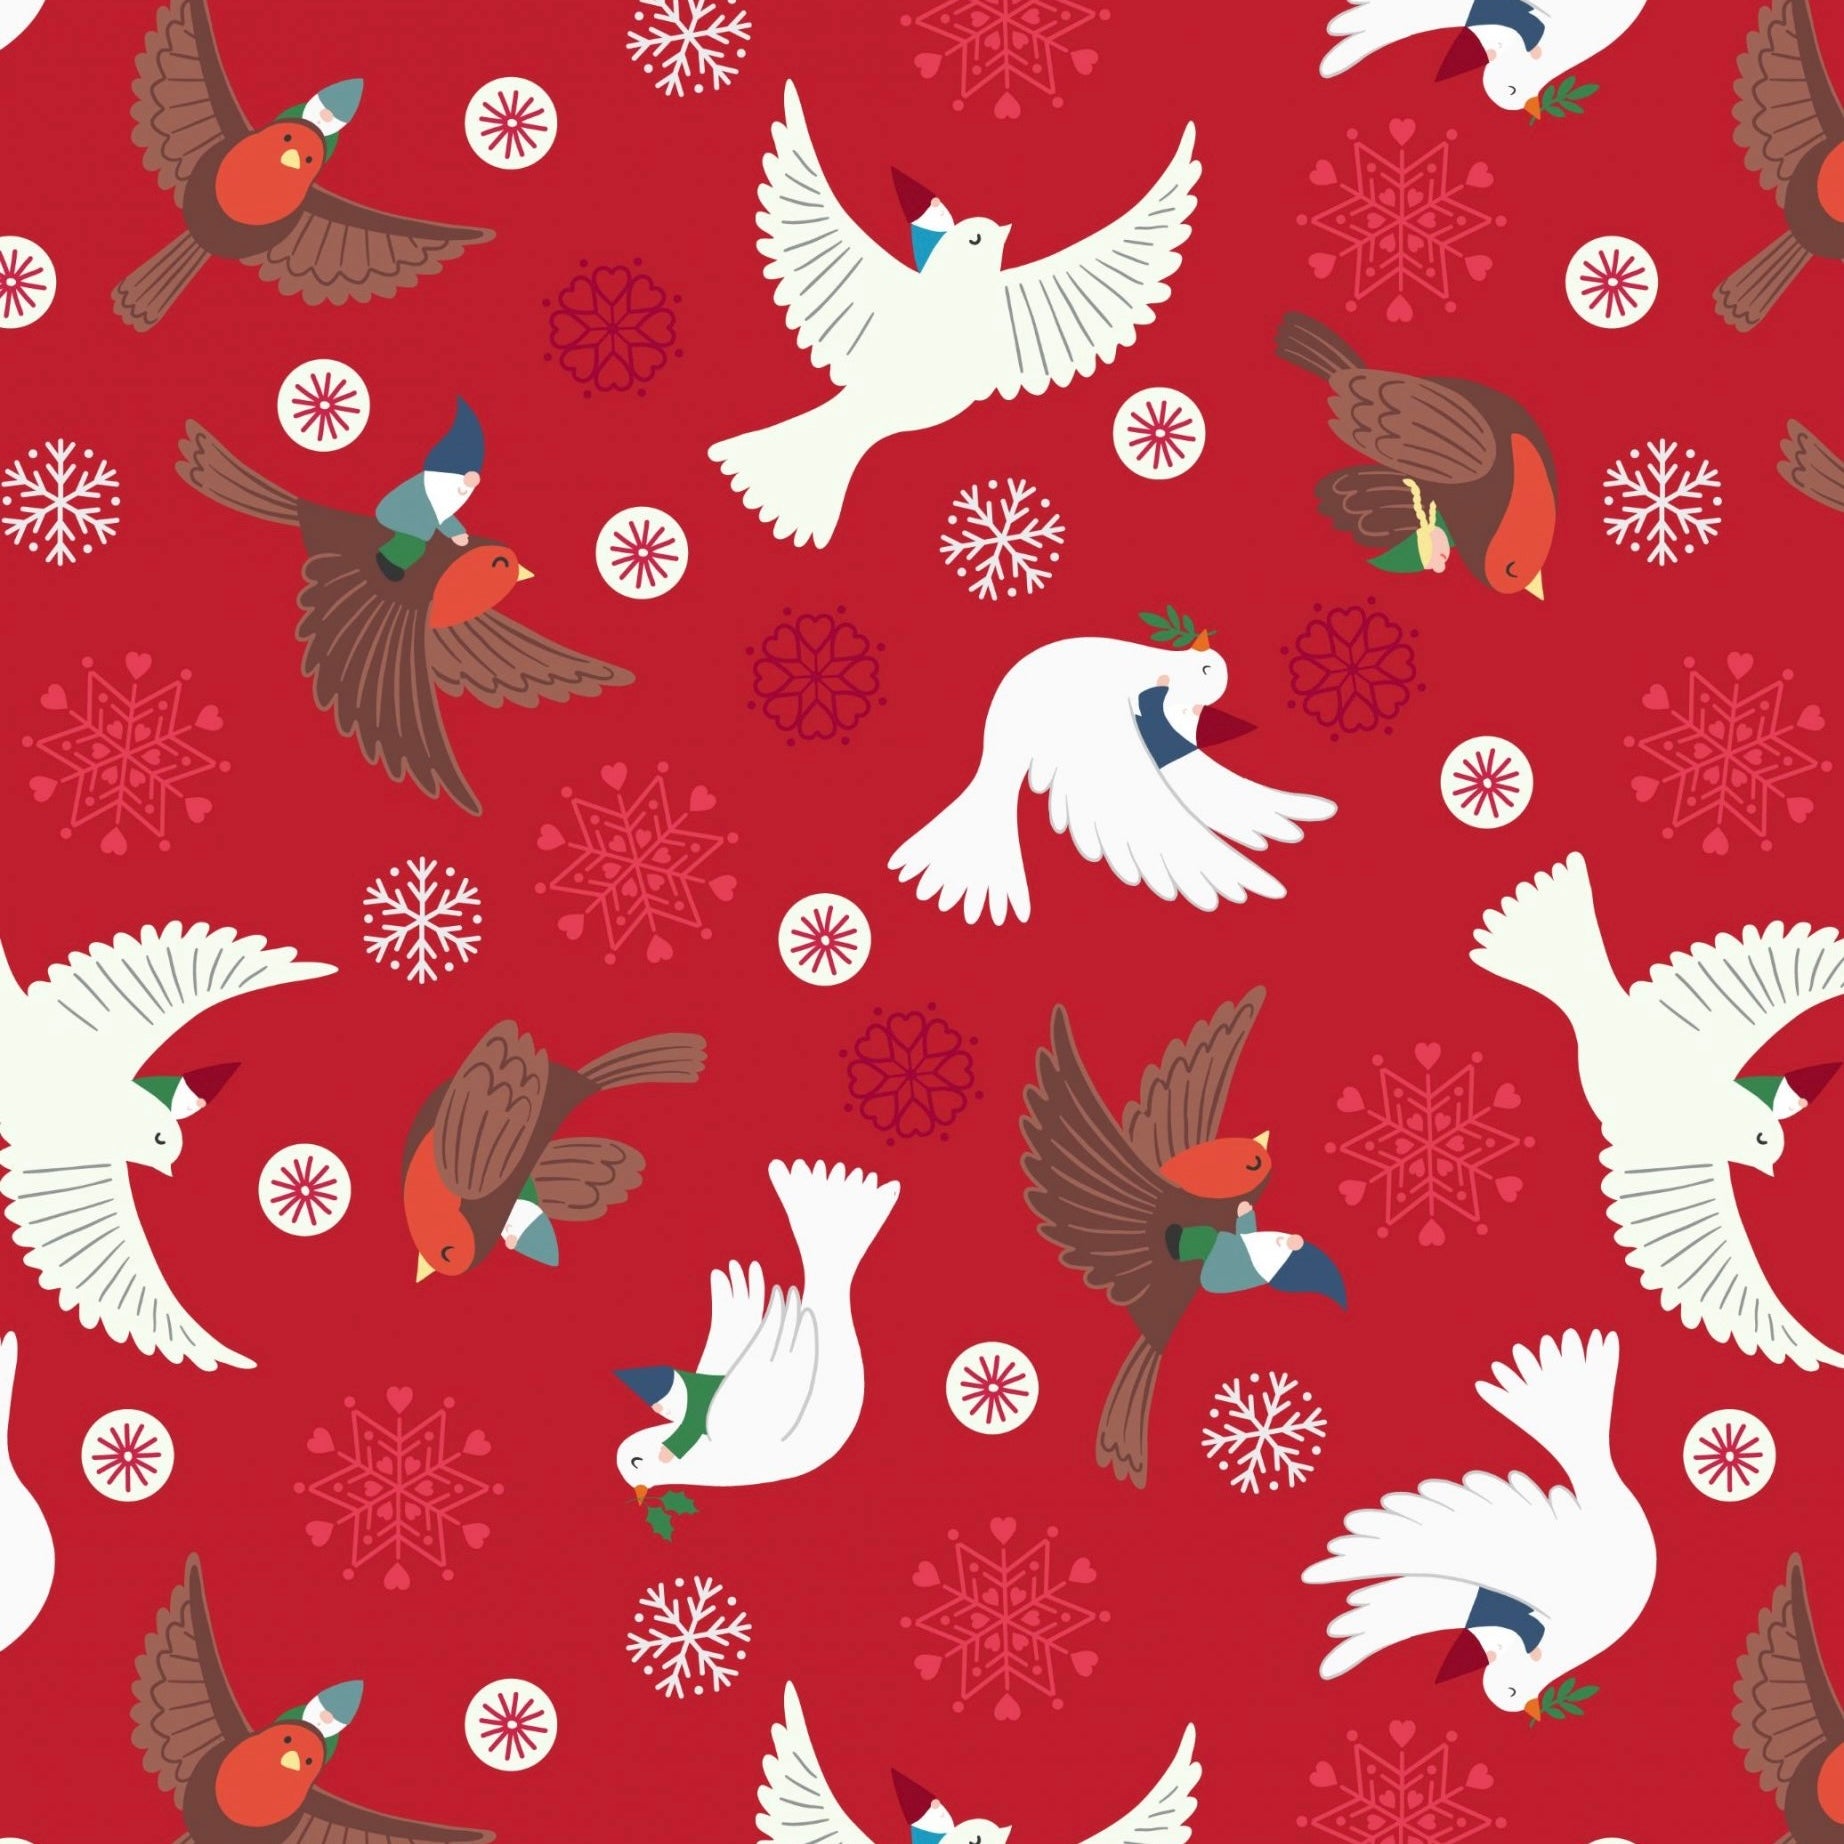 Glow in the Dark Flying Tomte Cotton Fabric - Red